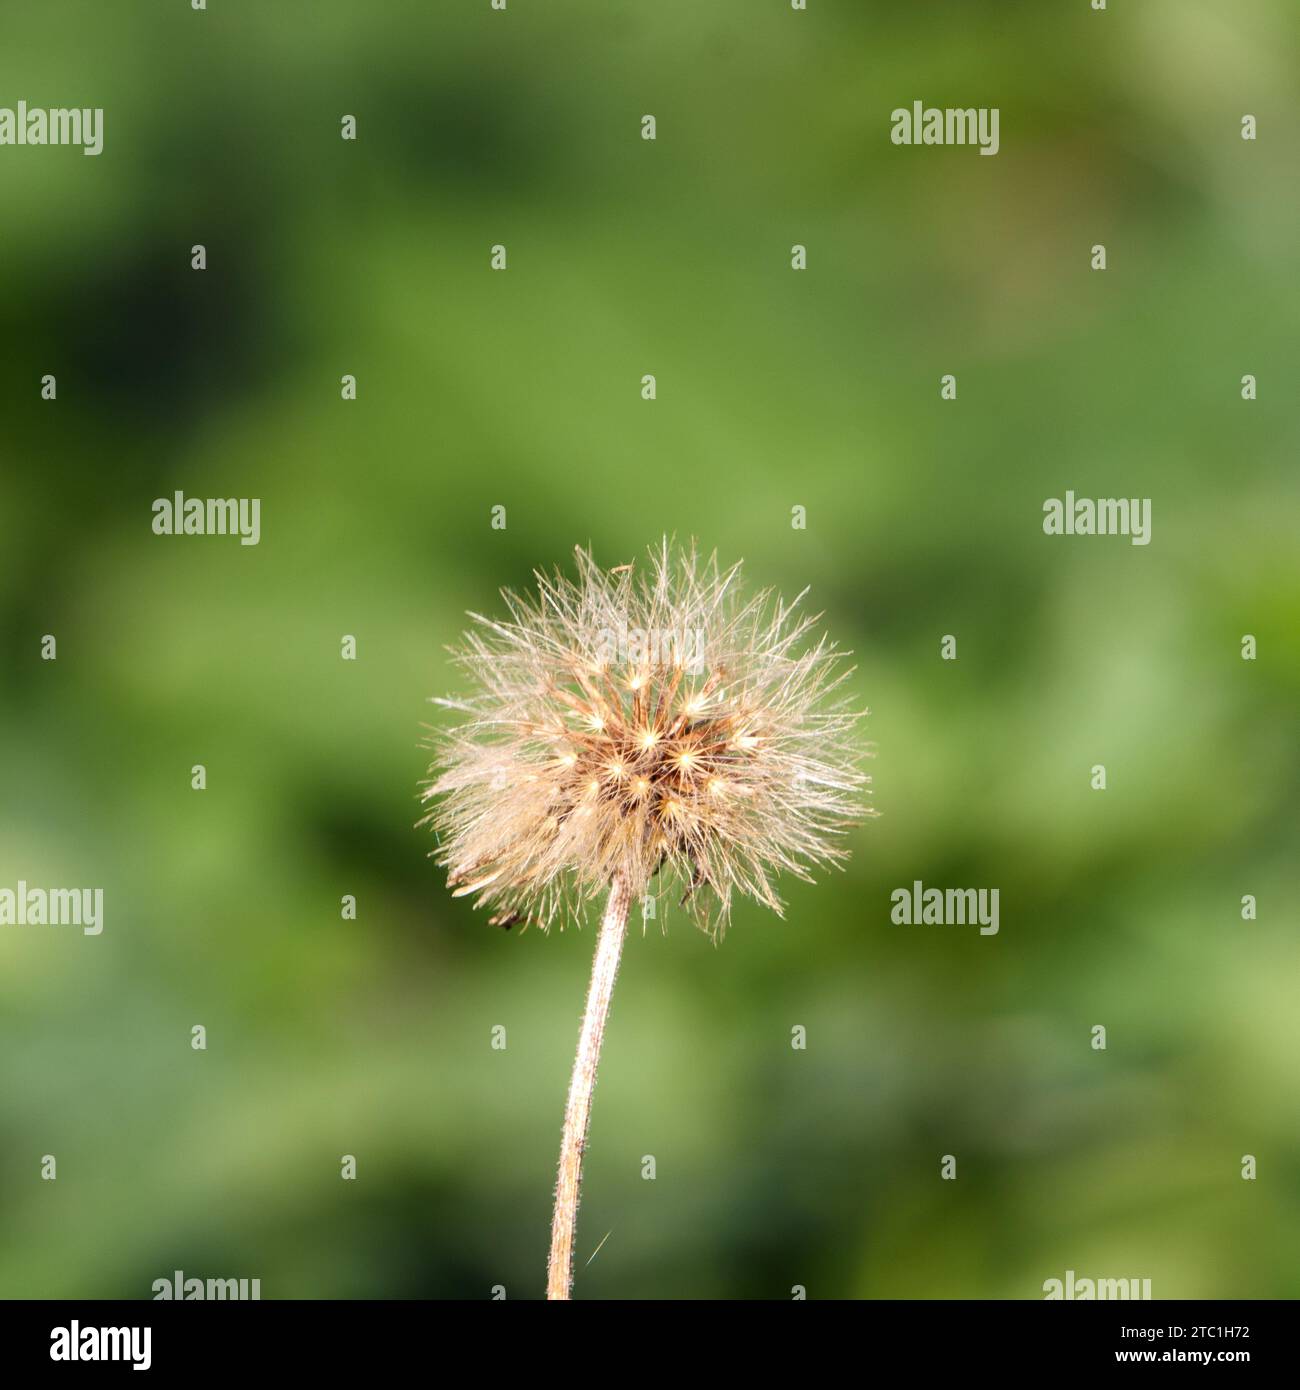 A vibrant yellow dandelion flower growing atop a lush green foliage plant in a natural outdoor setting Stock Photo